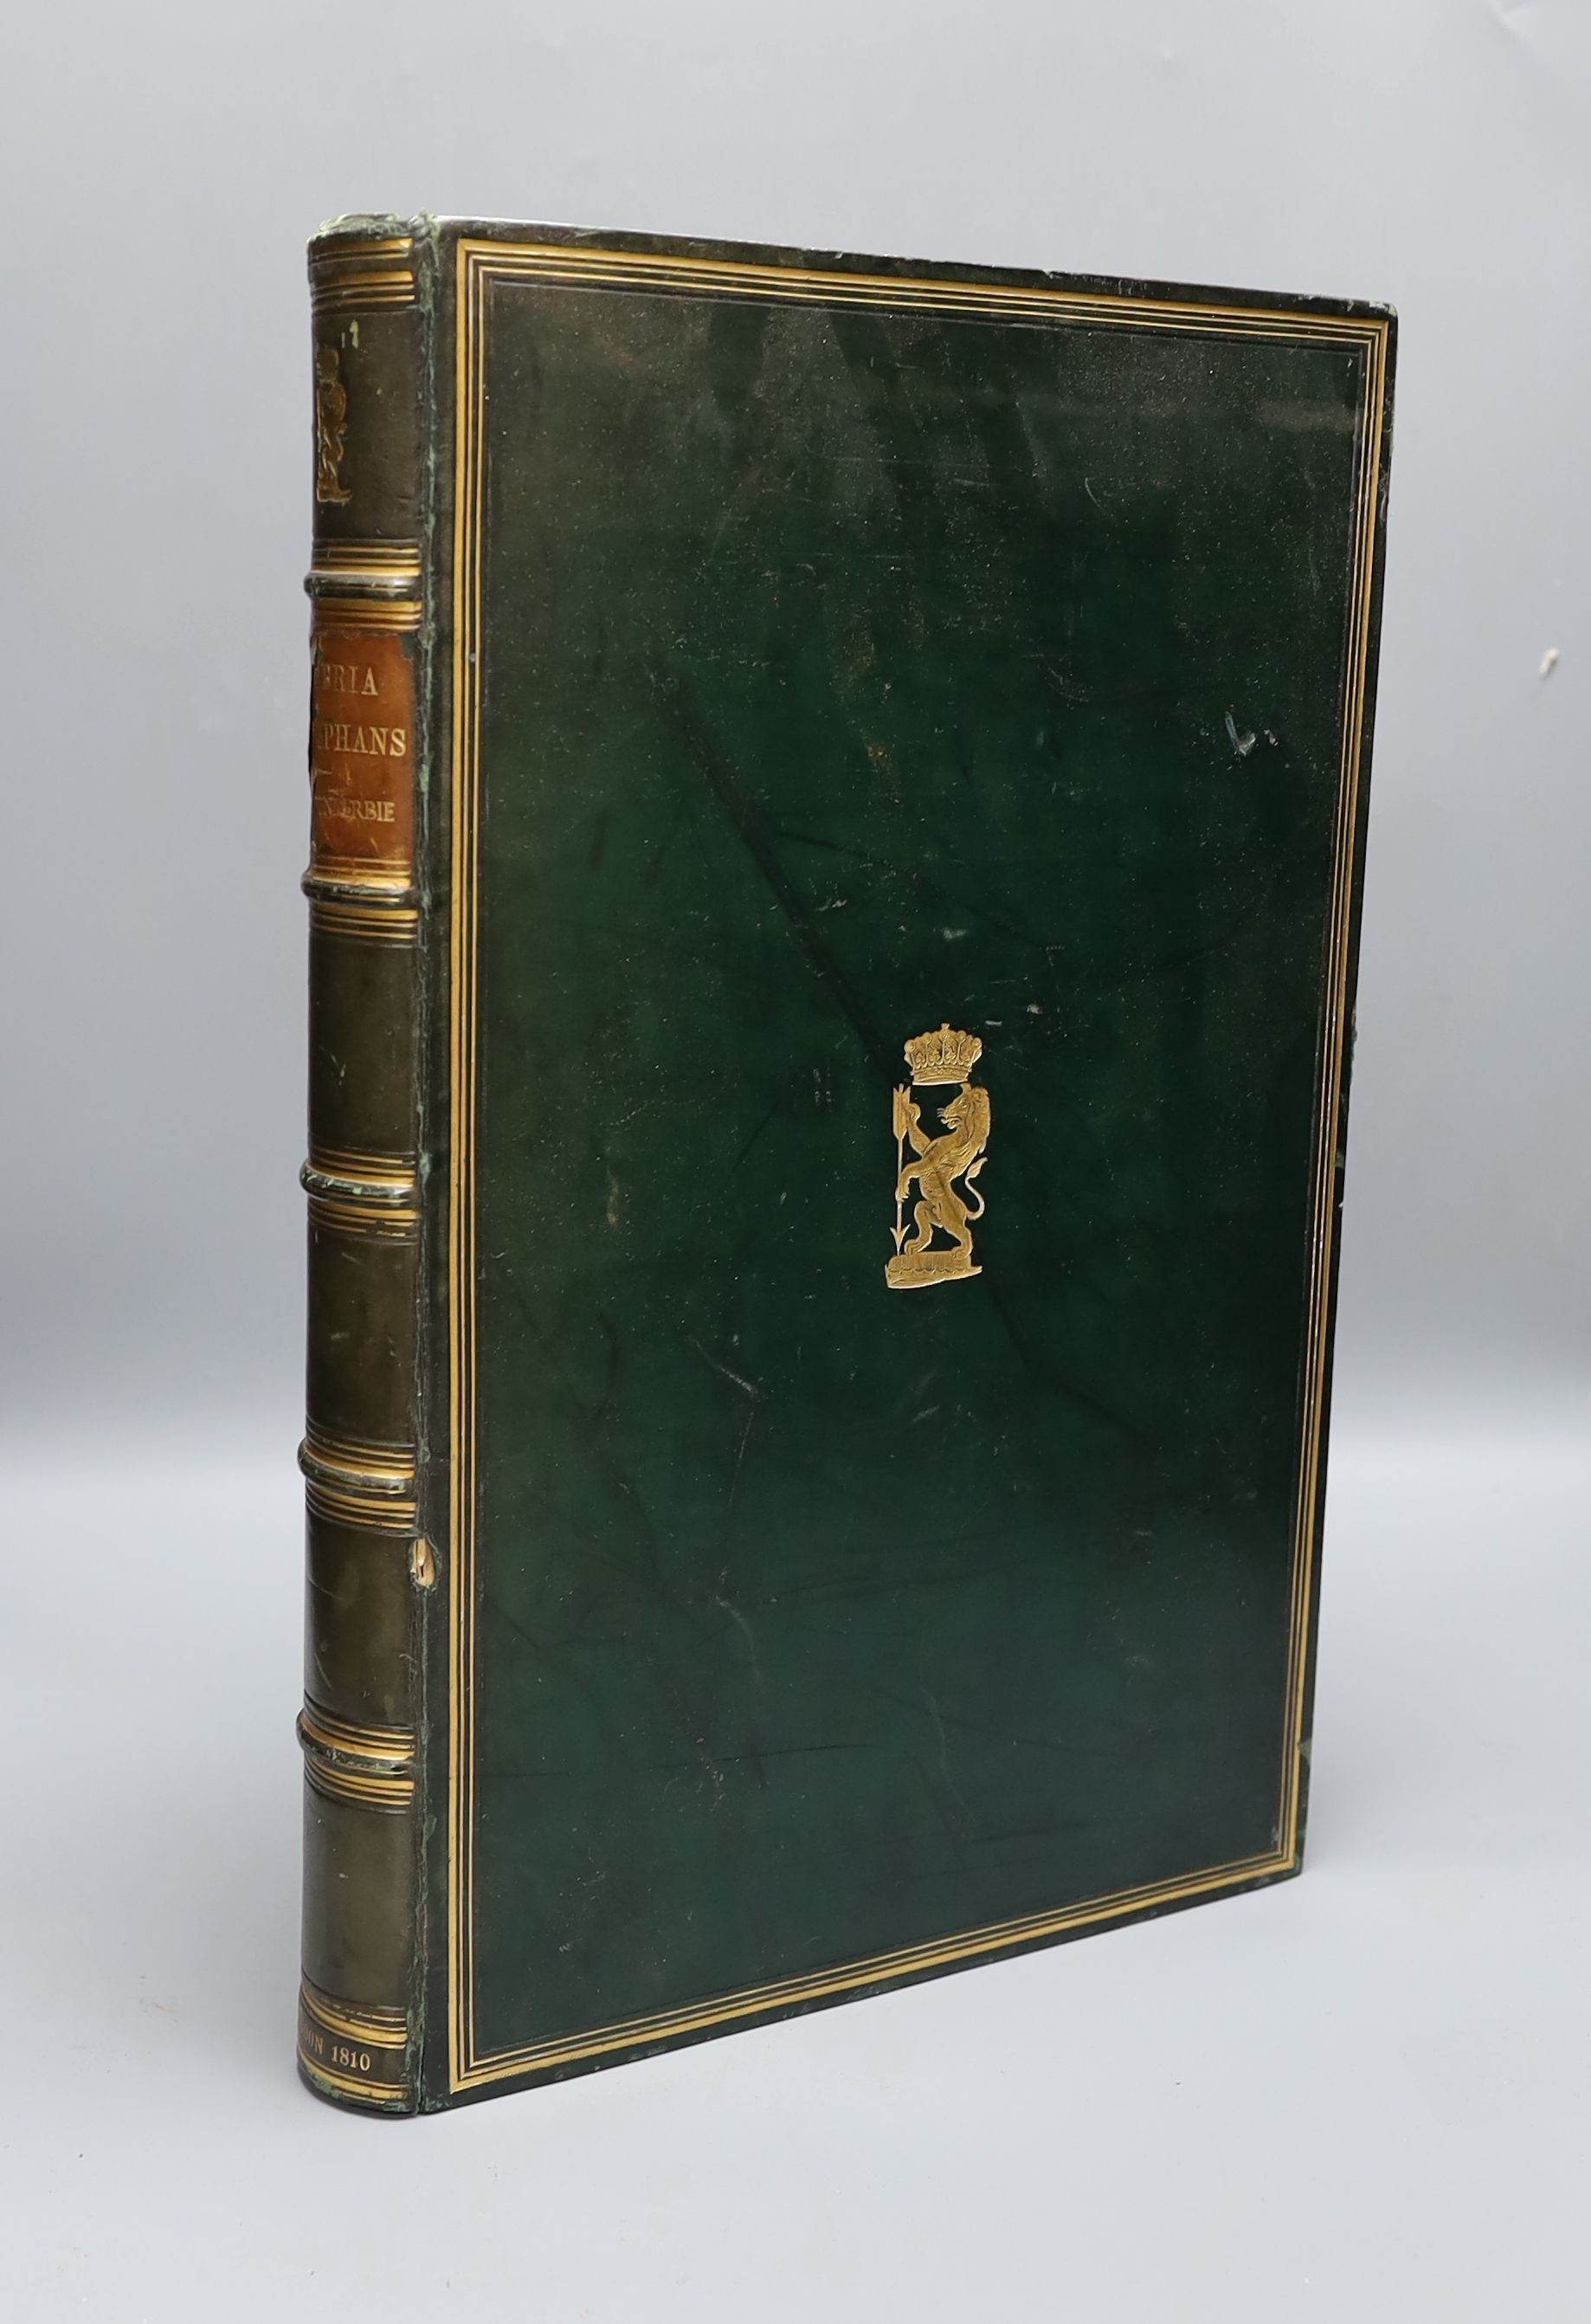 Enderbie, Percy - Cambria Triumphans, or Britain in its Perfect Lustre ... (new edition). engraved armorial frontispiece and 6 other plates, text engravings; contemp. polished green gilt-text ruled calf, panelled spine w